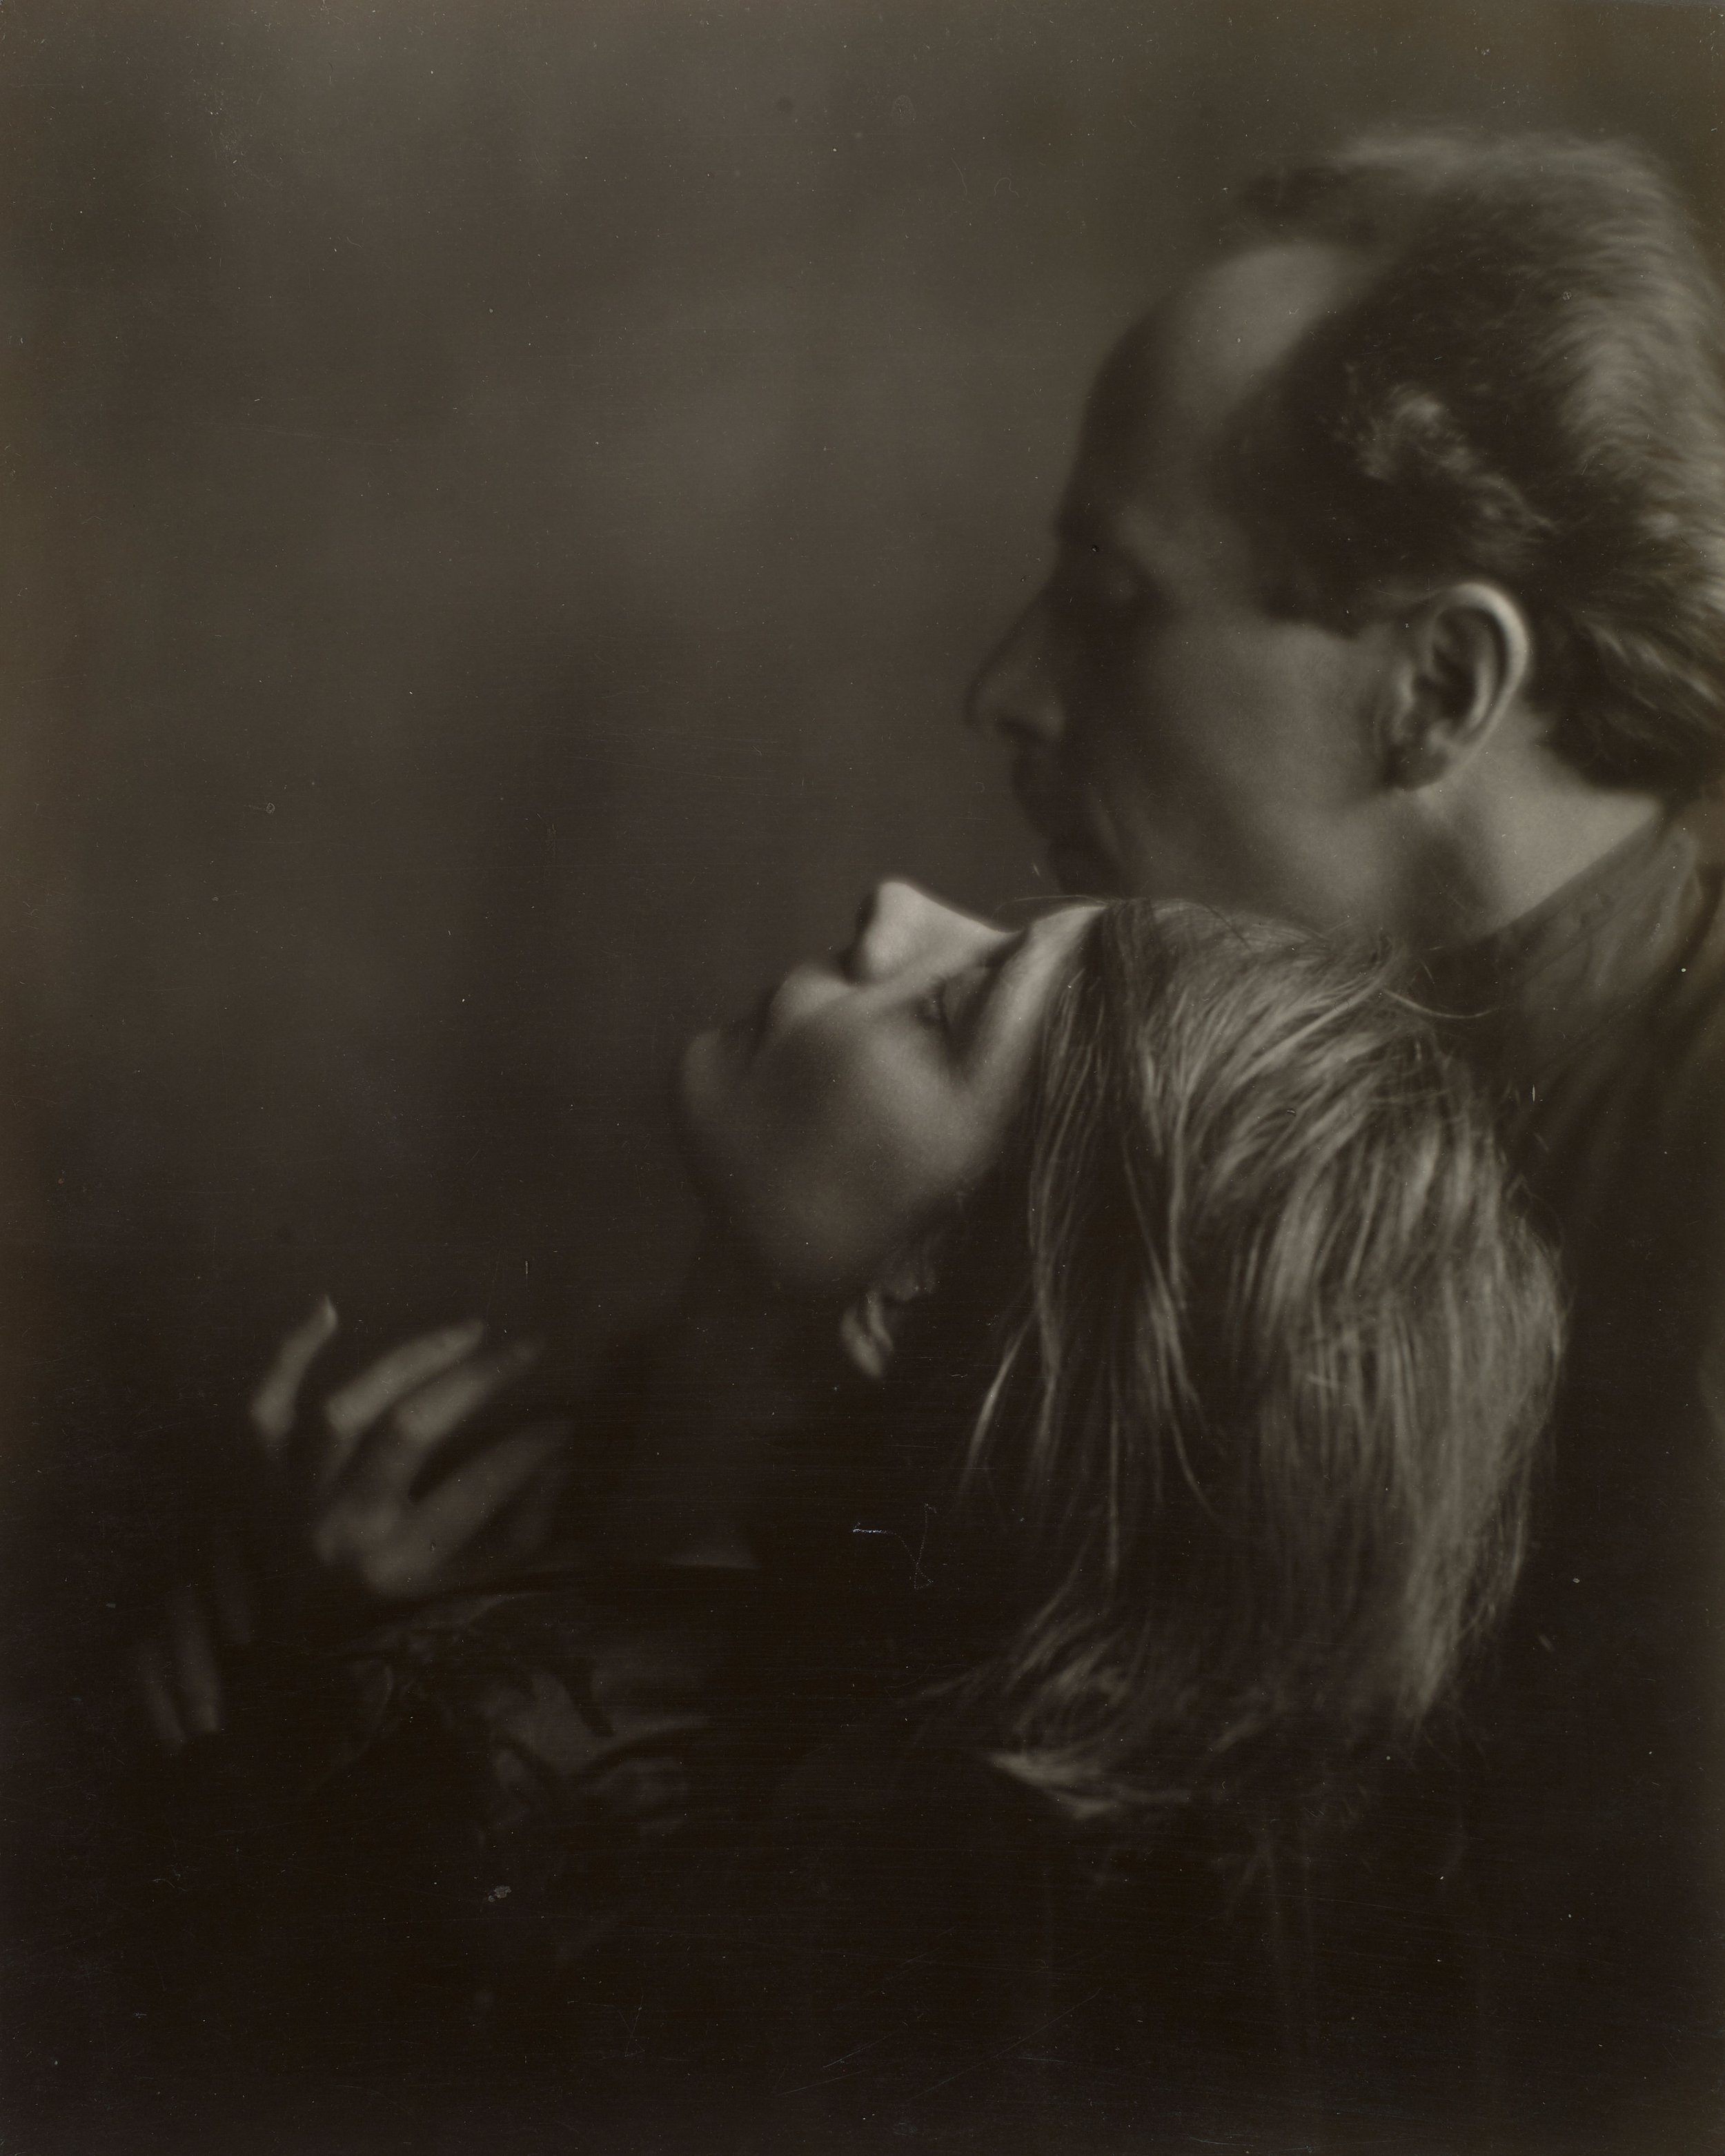  Imogen Cunningham (United States, 1883–1976),  Edward Weston and Margrethe Mather , 1922, gelatin silver print, 9 1/4 x 7 3/8 inches. Promised Gift from the Judy Glickman Lauder Collection, 5.2021. Image courtesy Luc Demers. © 2022 Imogen Cunningham